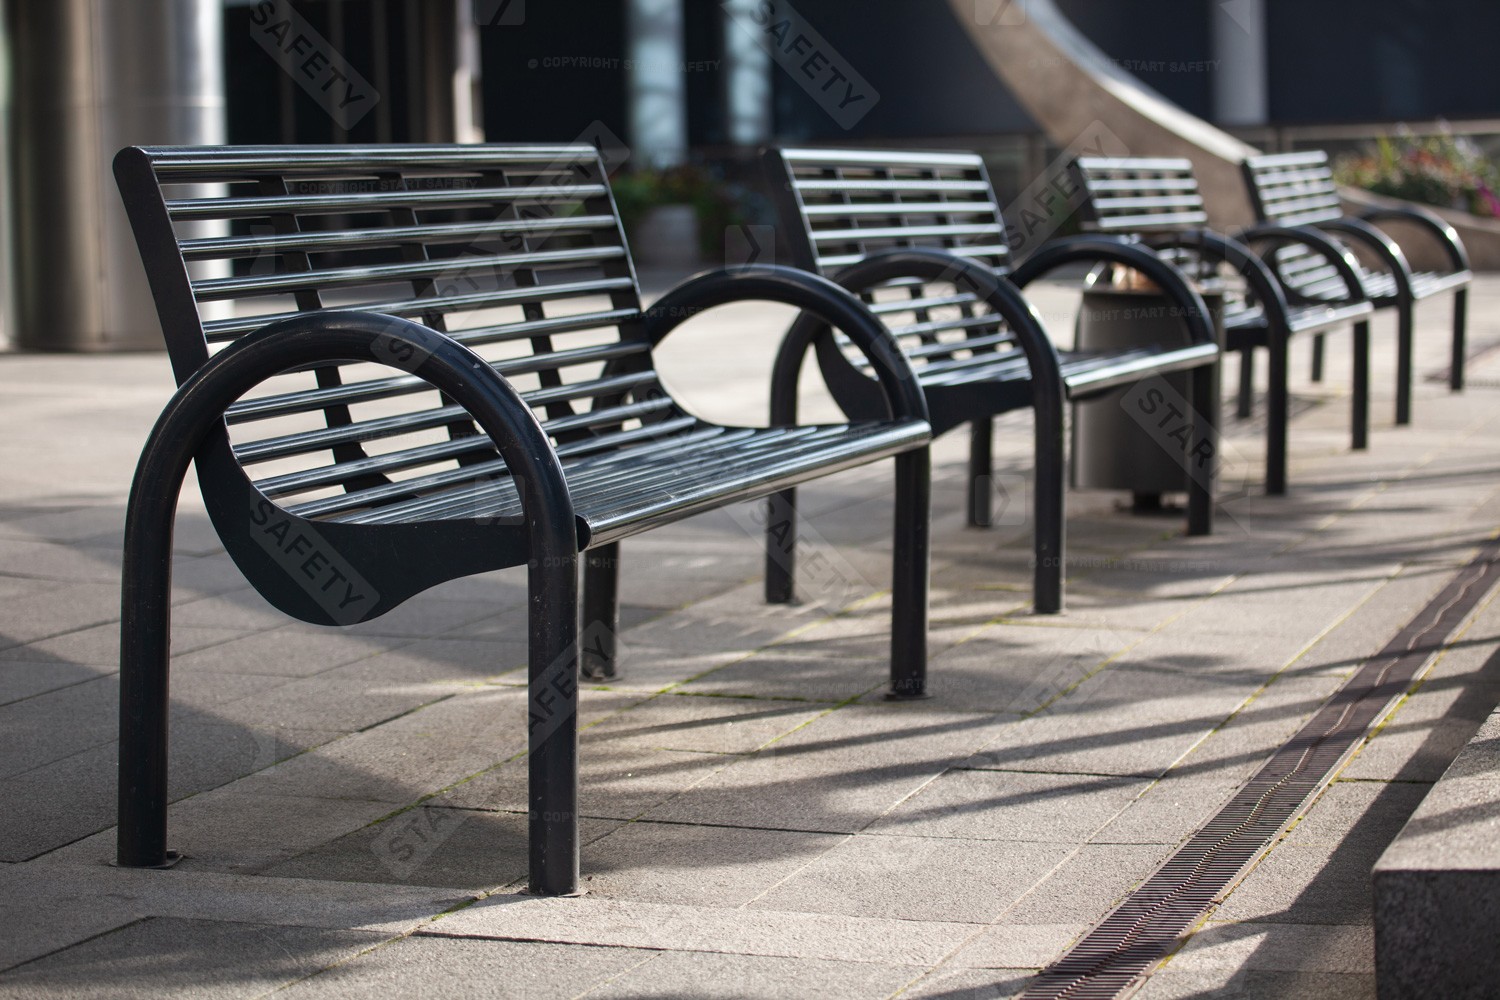 Collection Of Full Steel Modular Seat Benches Next To Road